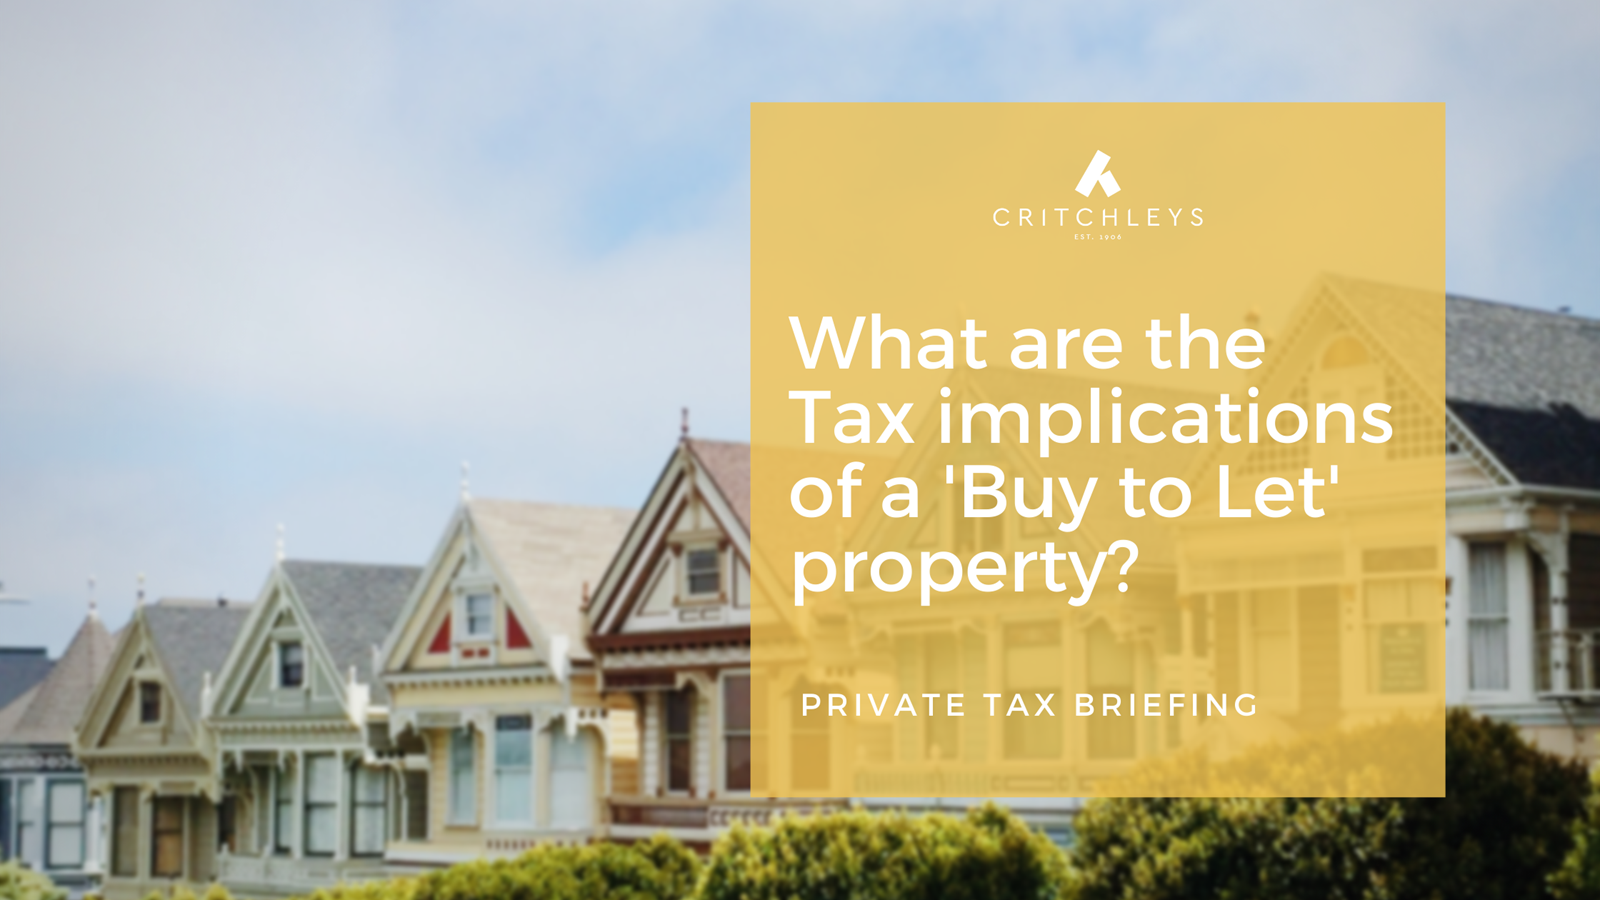 What are the Tax implications of a 'Buy to Let' property?